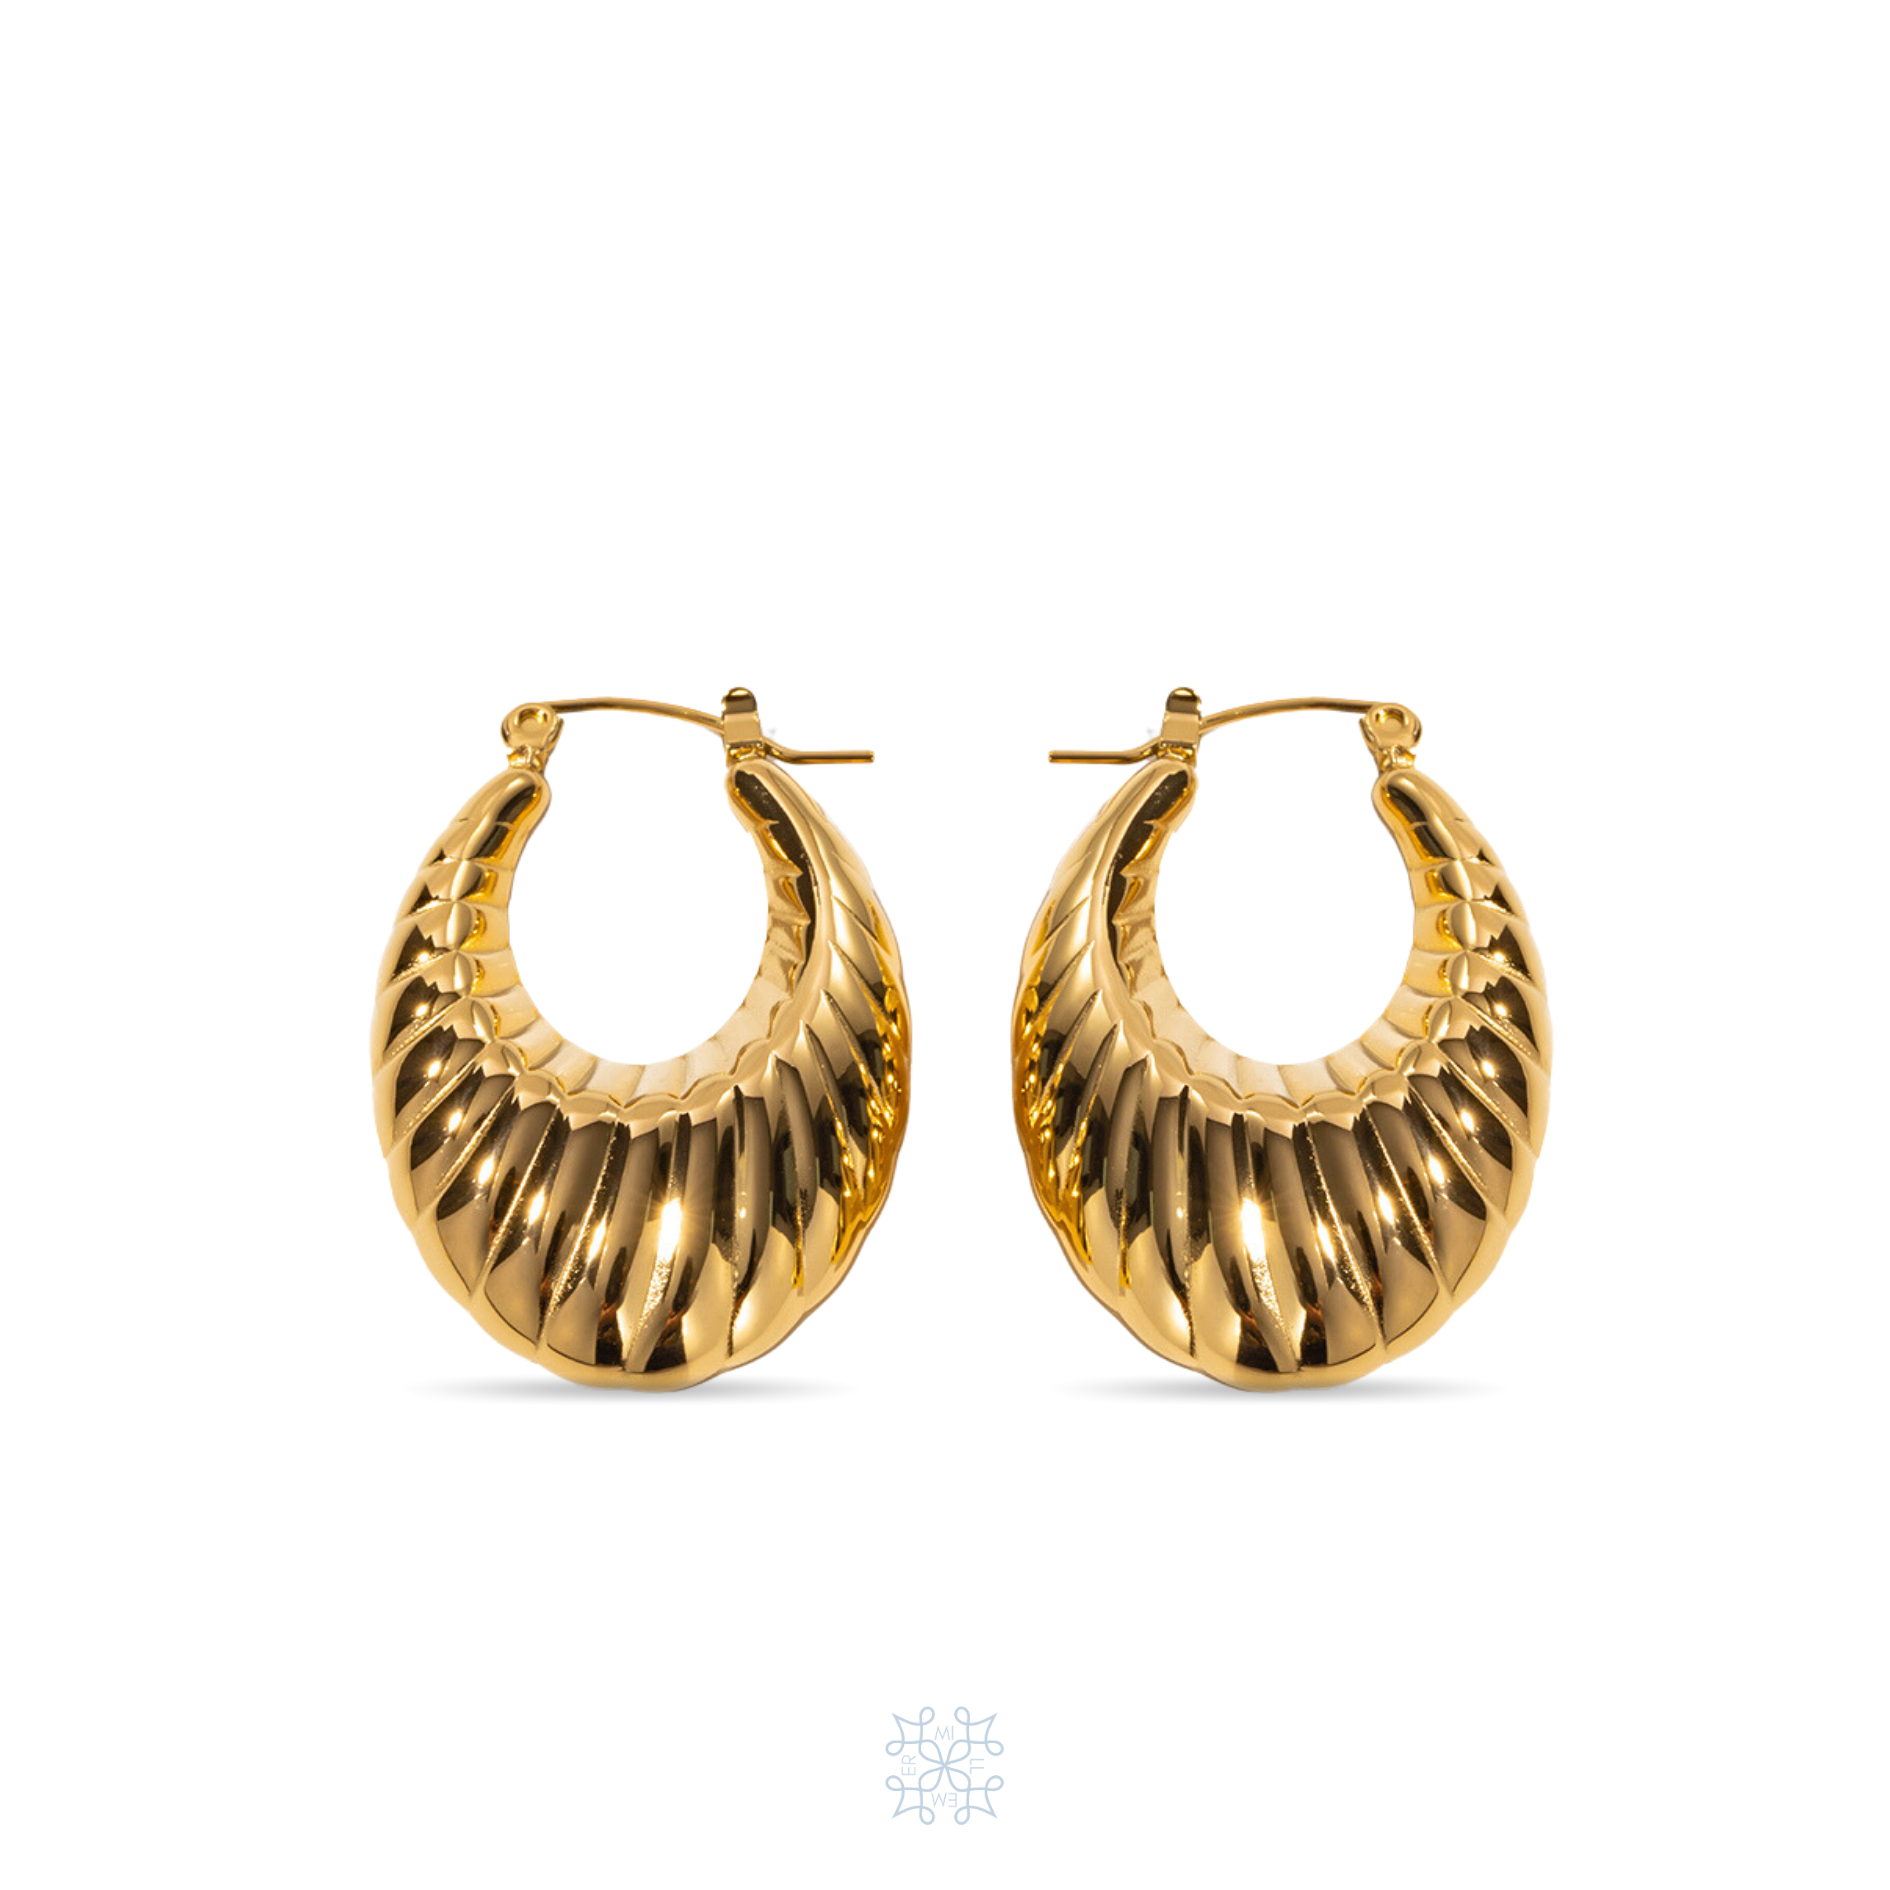 MELONI Earrings. Oval shaped gold hoop earrings. Chunky look in the bottom part of the oval.